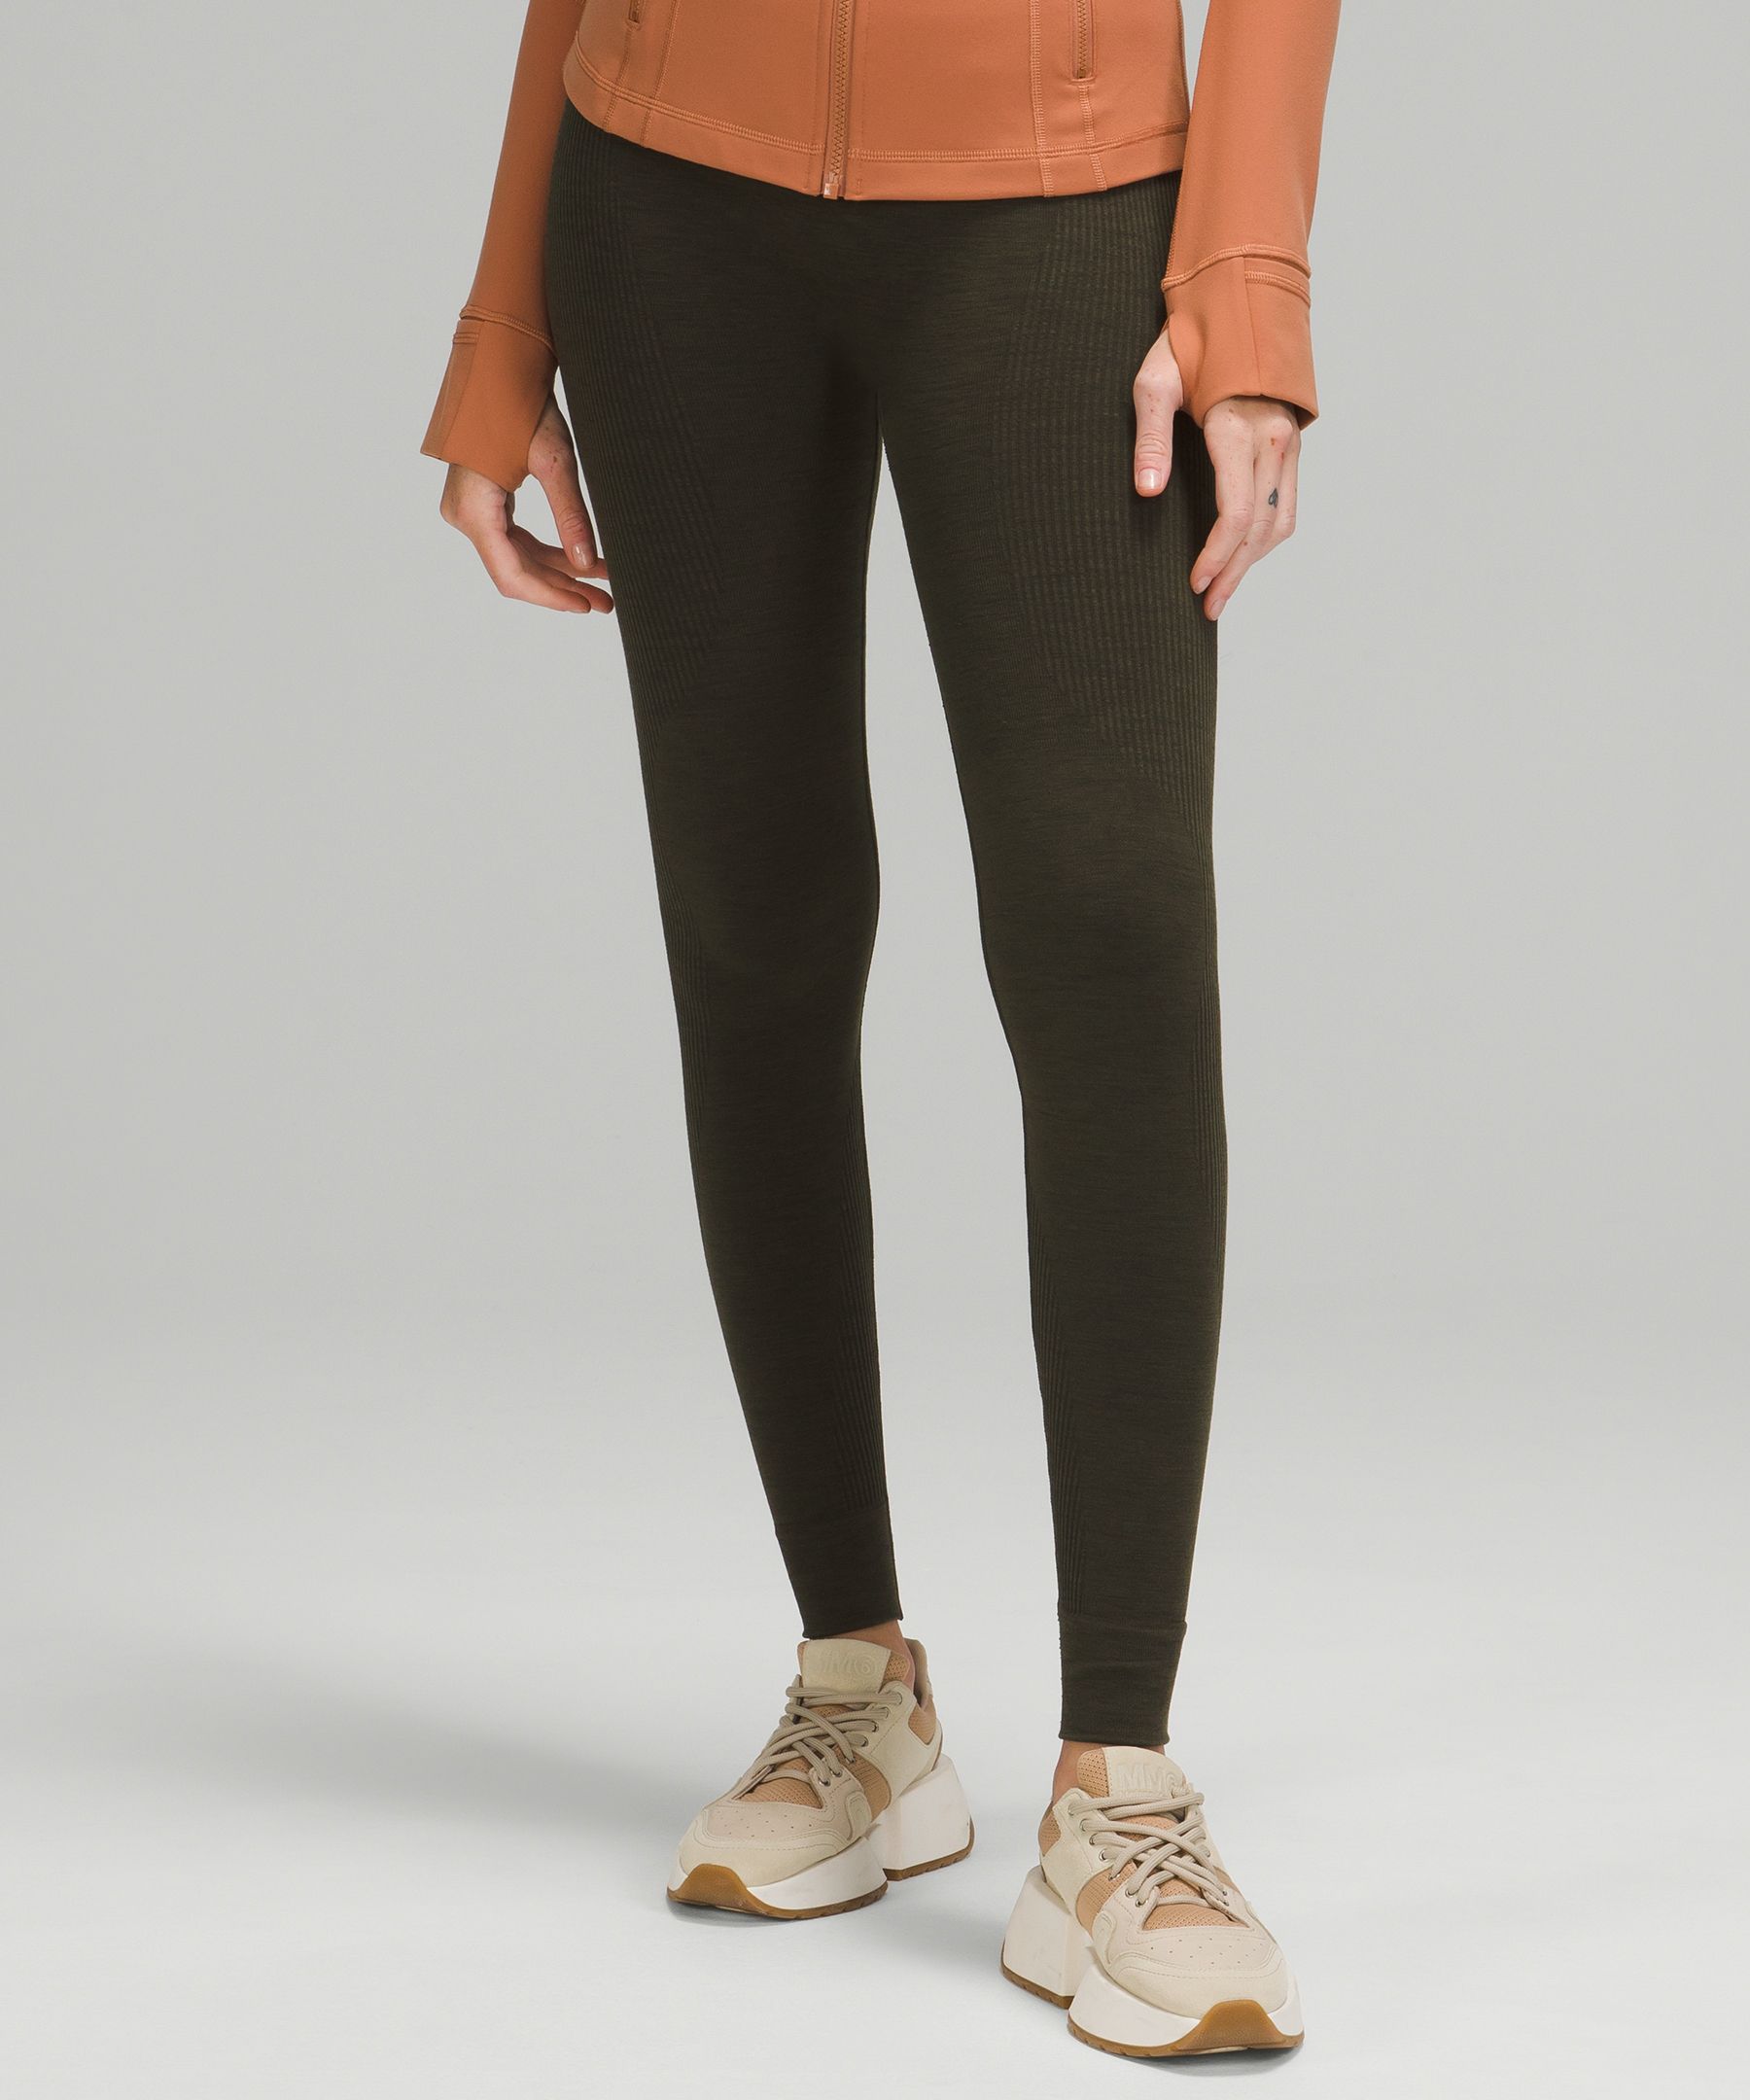 Take a step-up in warmth with leggings and tights. 🚶♀️💛 - Heat